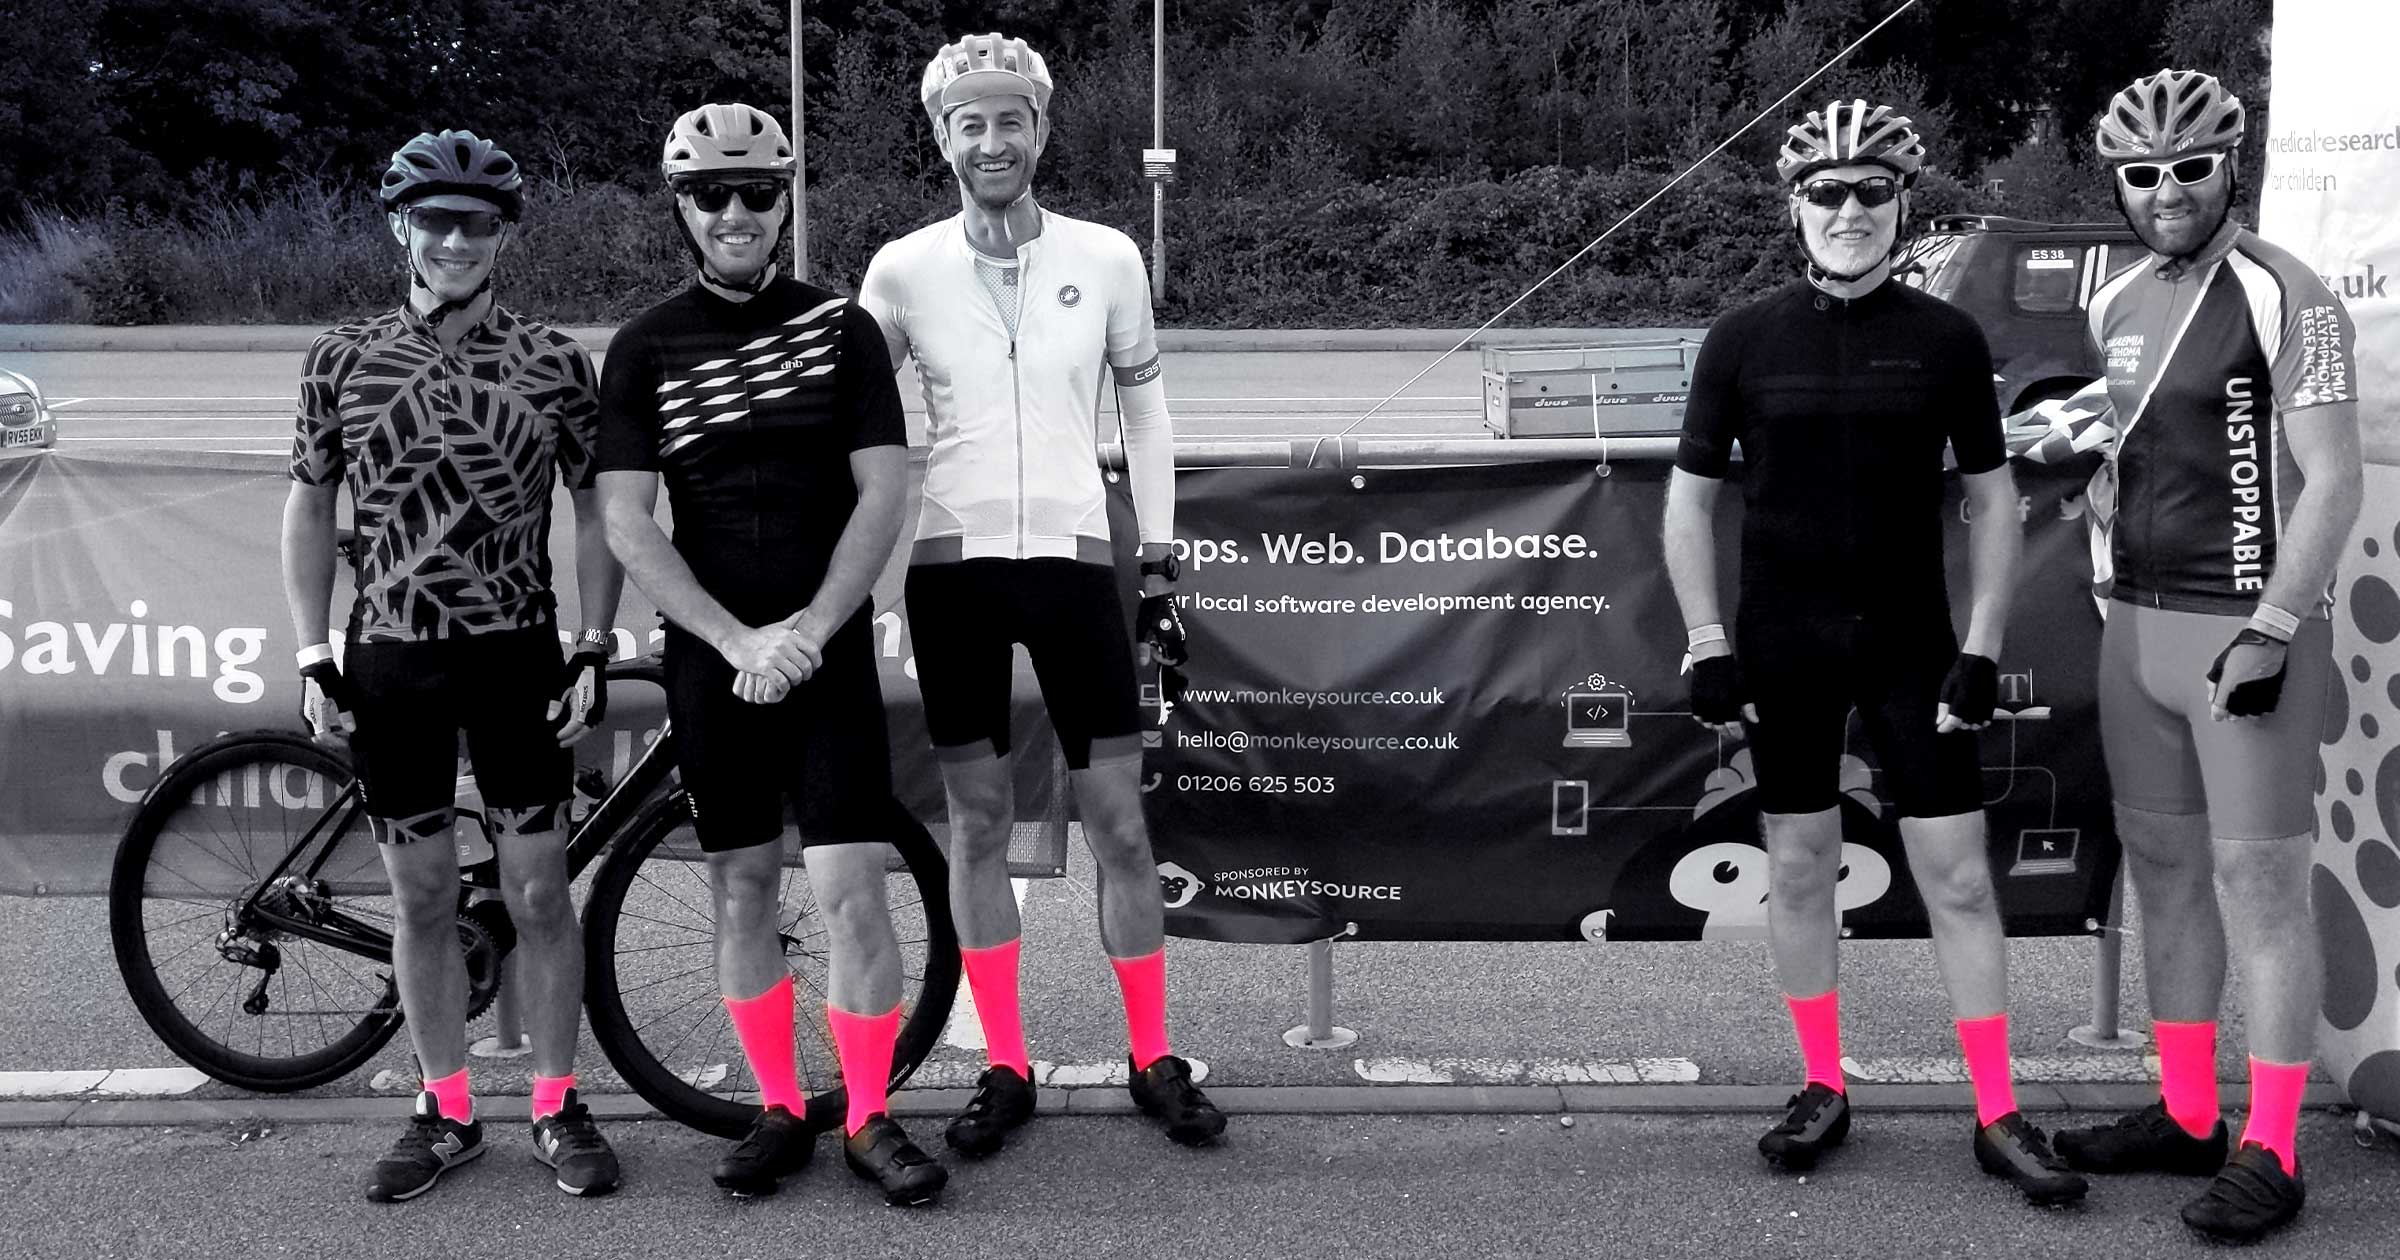 An image showing the team before the race, wearing pink socks